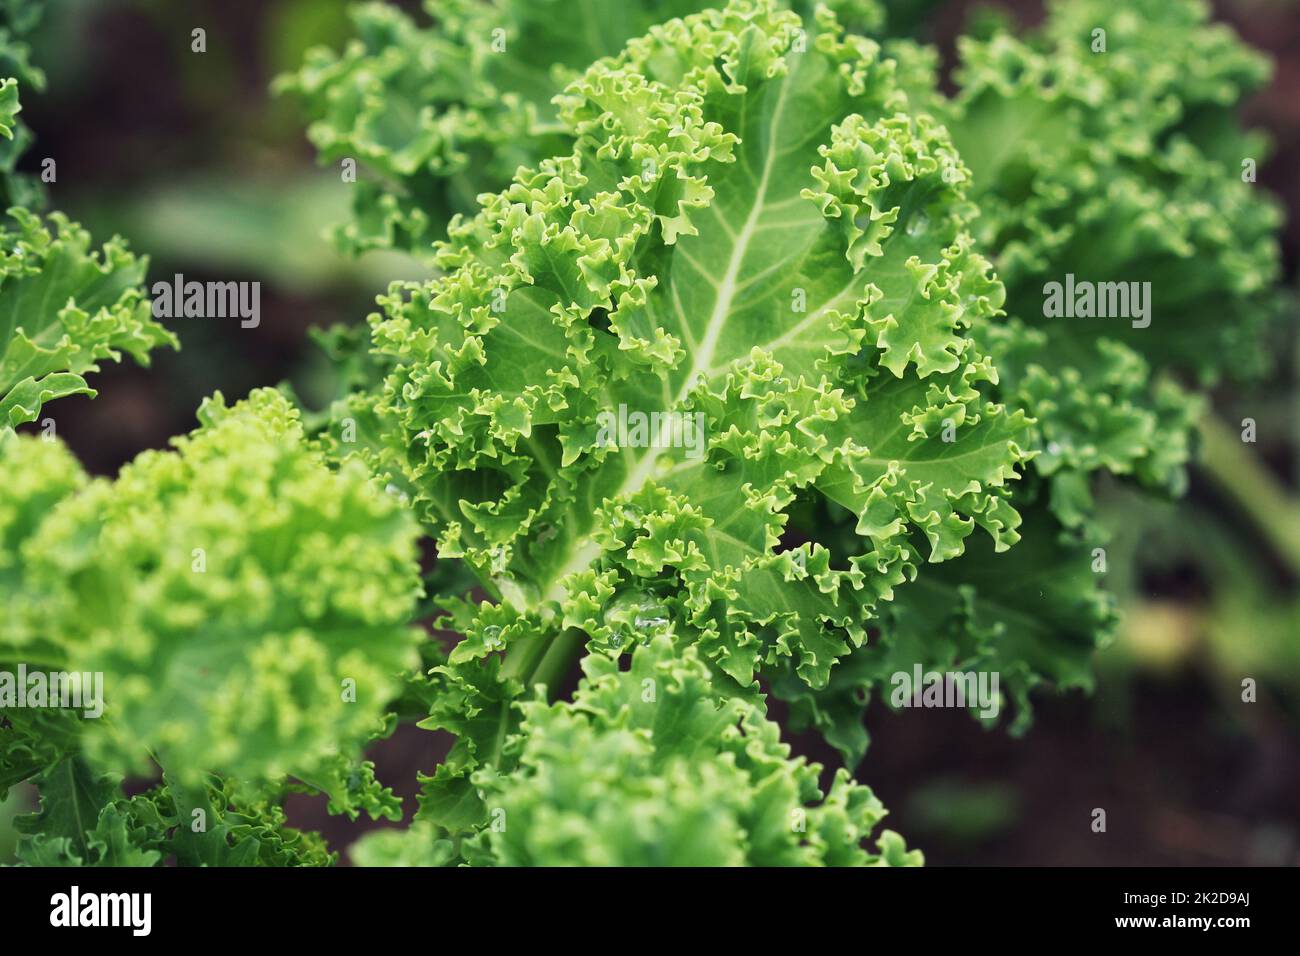 Young kale growing in the vegetable garden Stock Photo